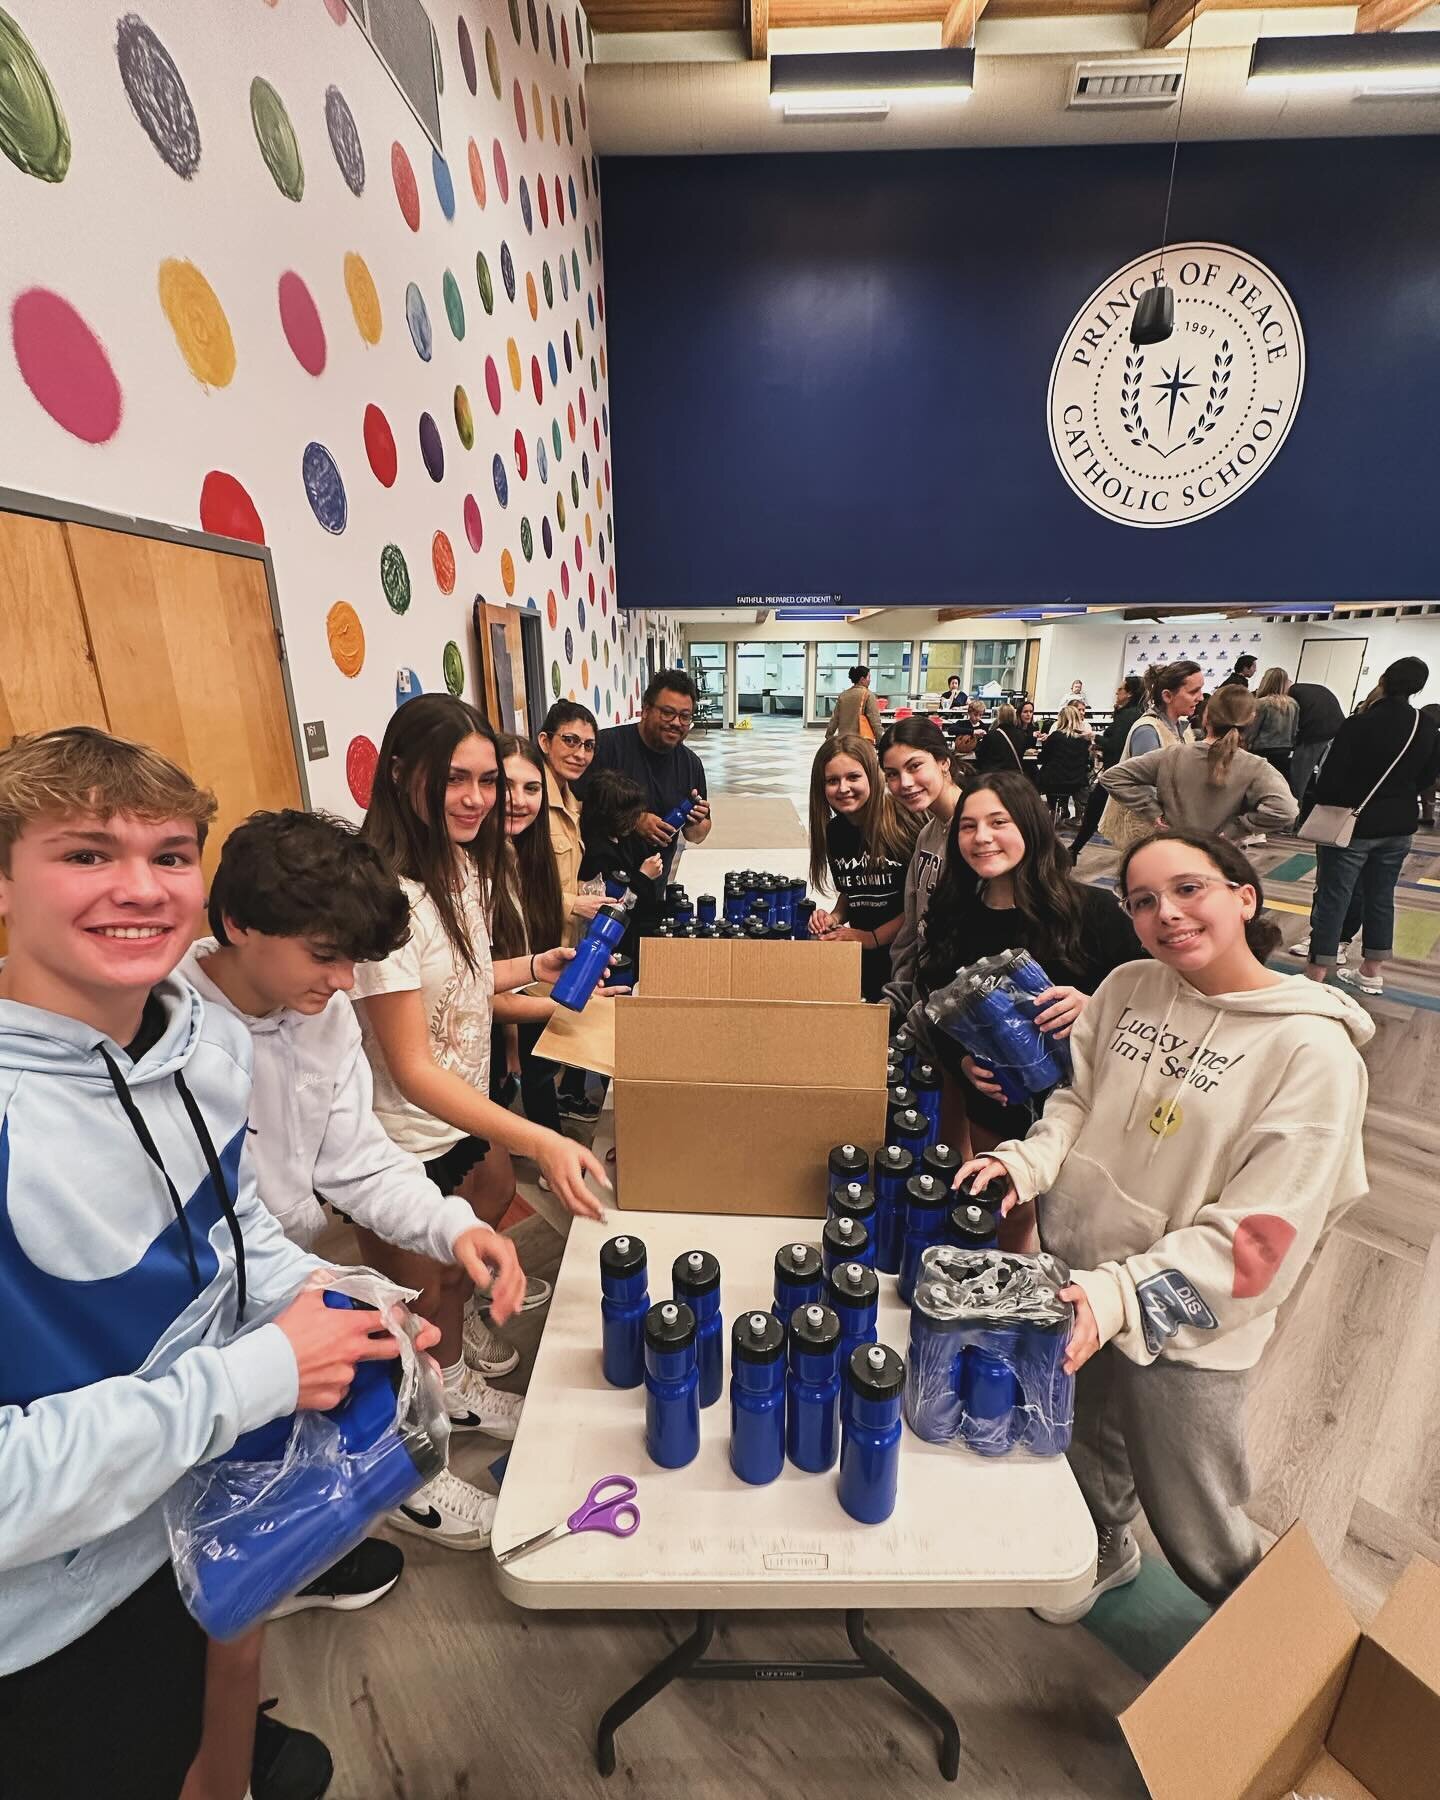 SERVIAM NIGHT 🤝🌊

Last night our parish and school families partnered with @veraaquaveravita and made packages for the families in Peru that don&rsquo;t have access to clean water or hygiene. Thank you Lord for giving us the opportunity to serve ou